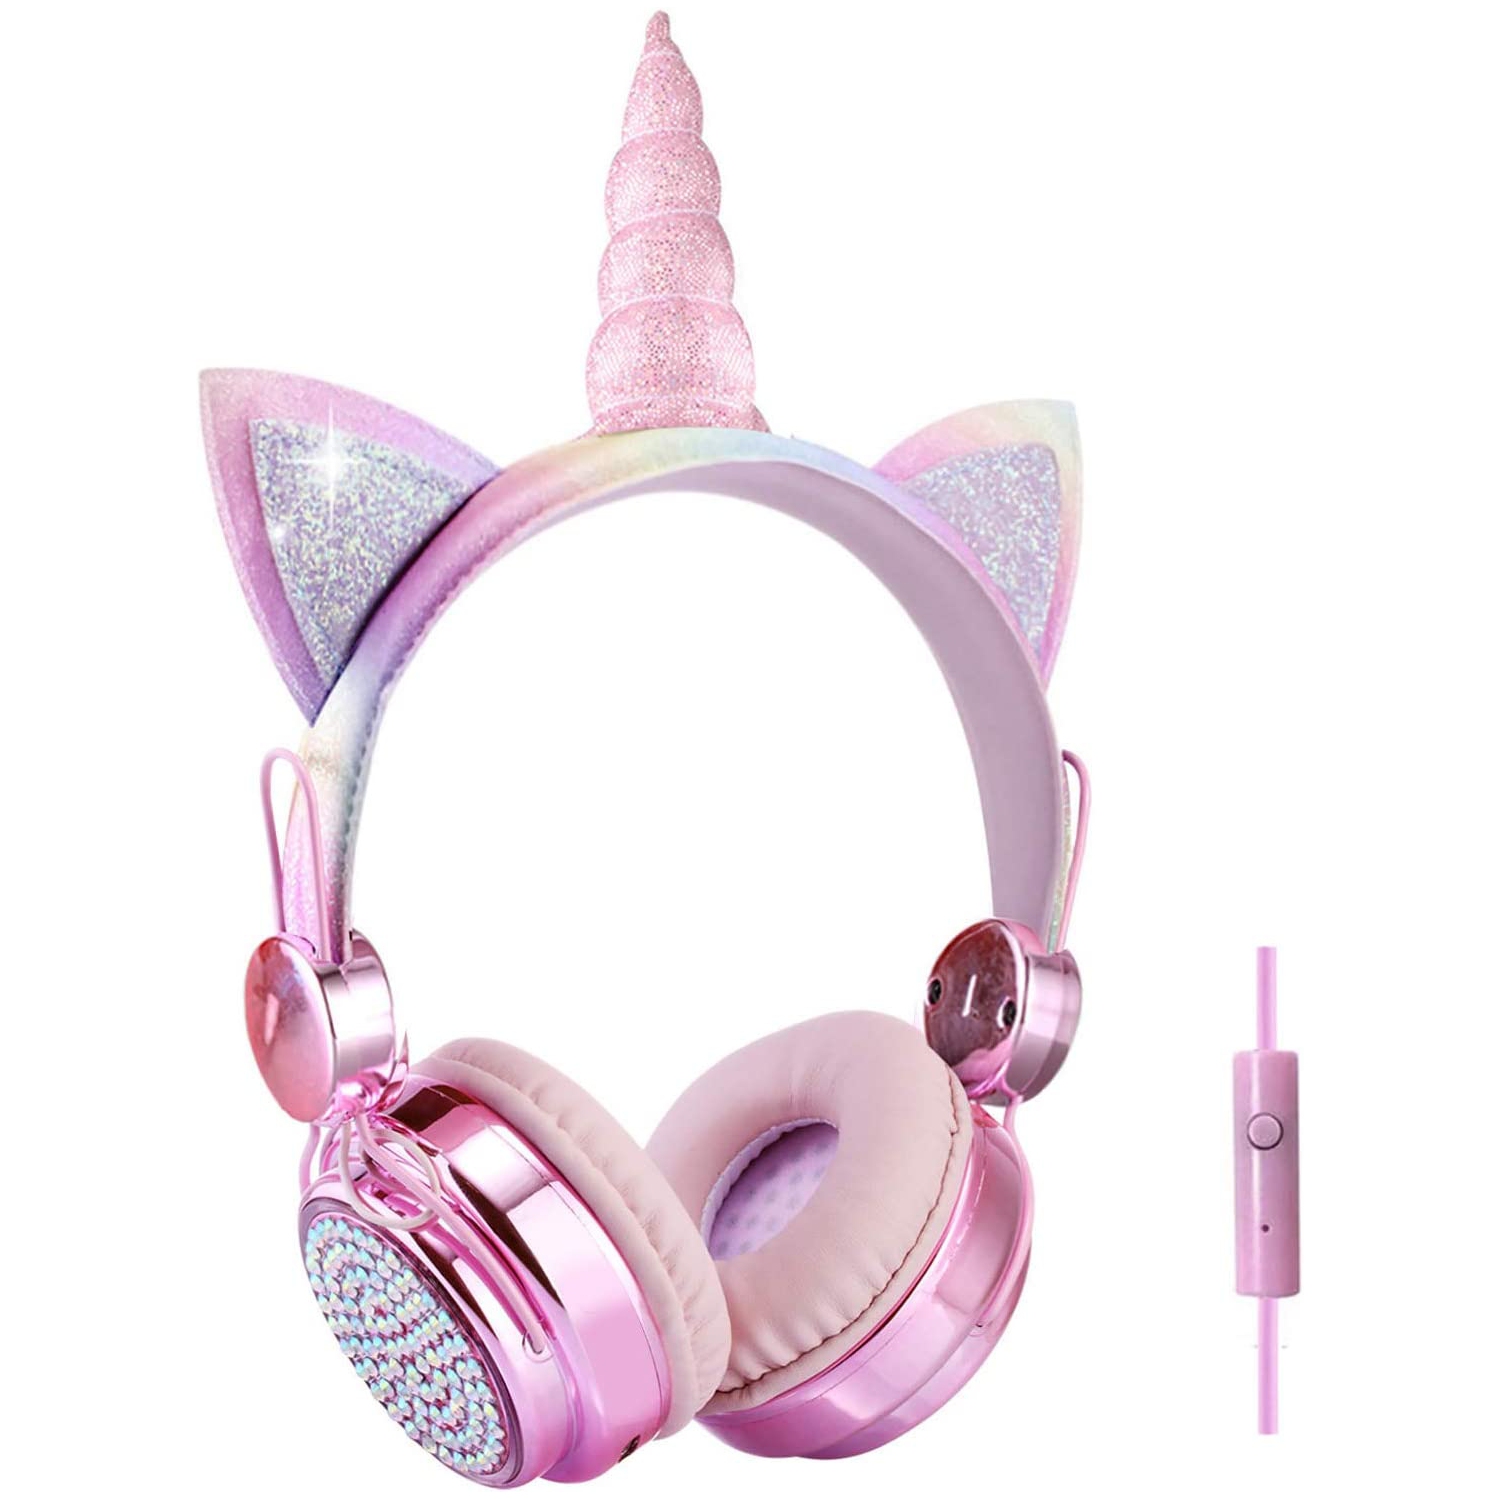 Dolaer Unicorn Kids Headphones 85dB Volume Limiting Adjustable on Ear Anime Wired Headphones with Microphone for Girls Children School Home Travel Christmas Parties (Rainbow)